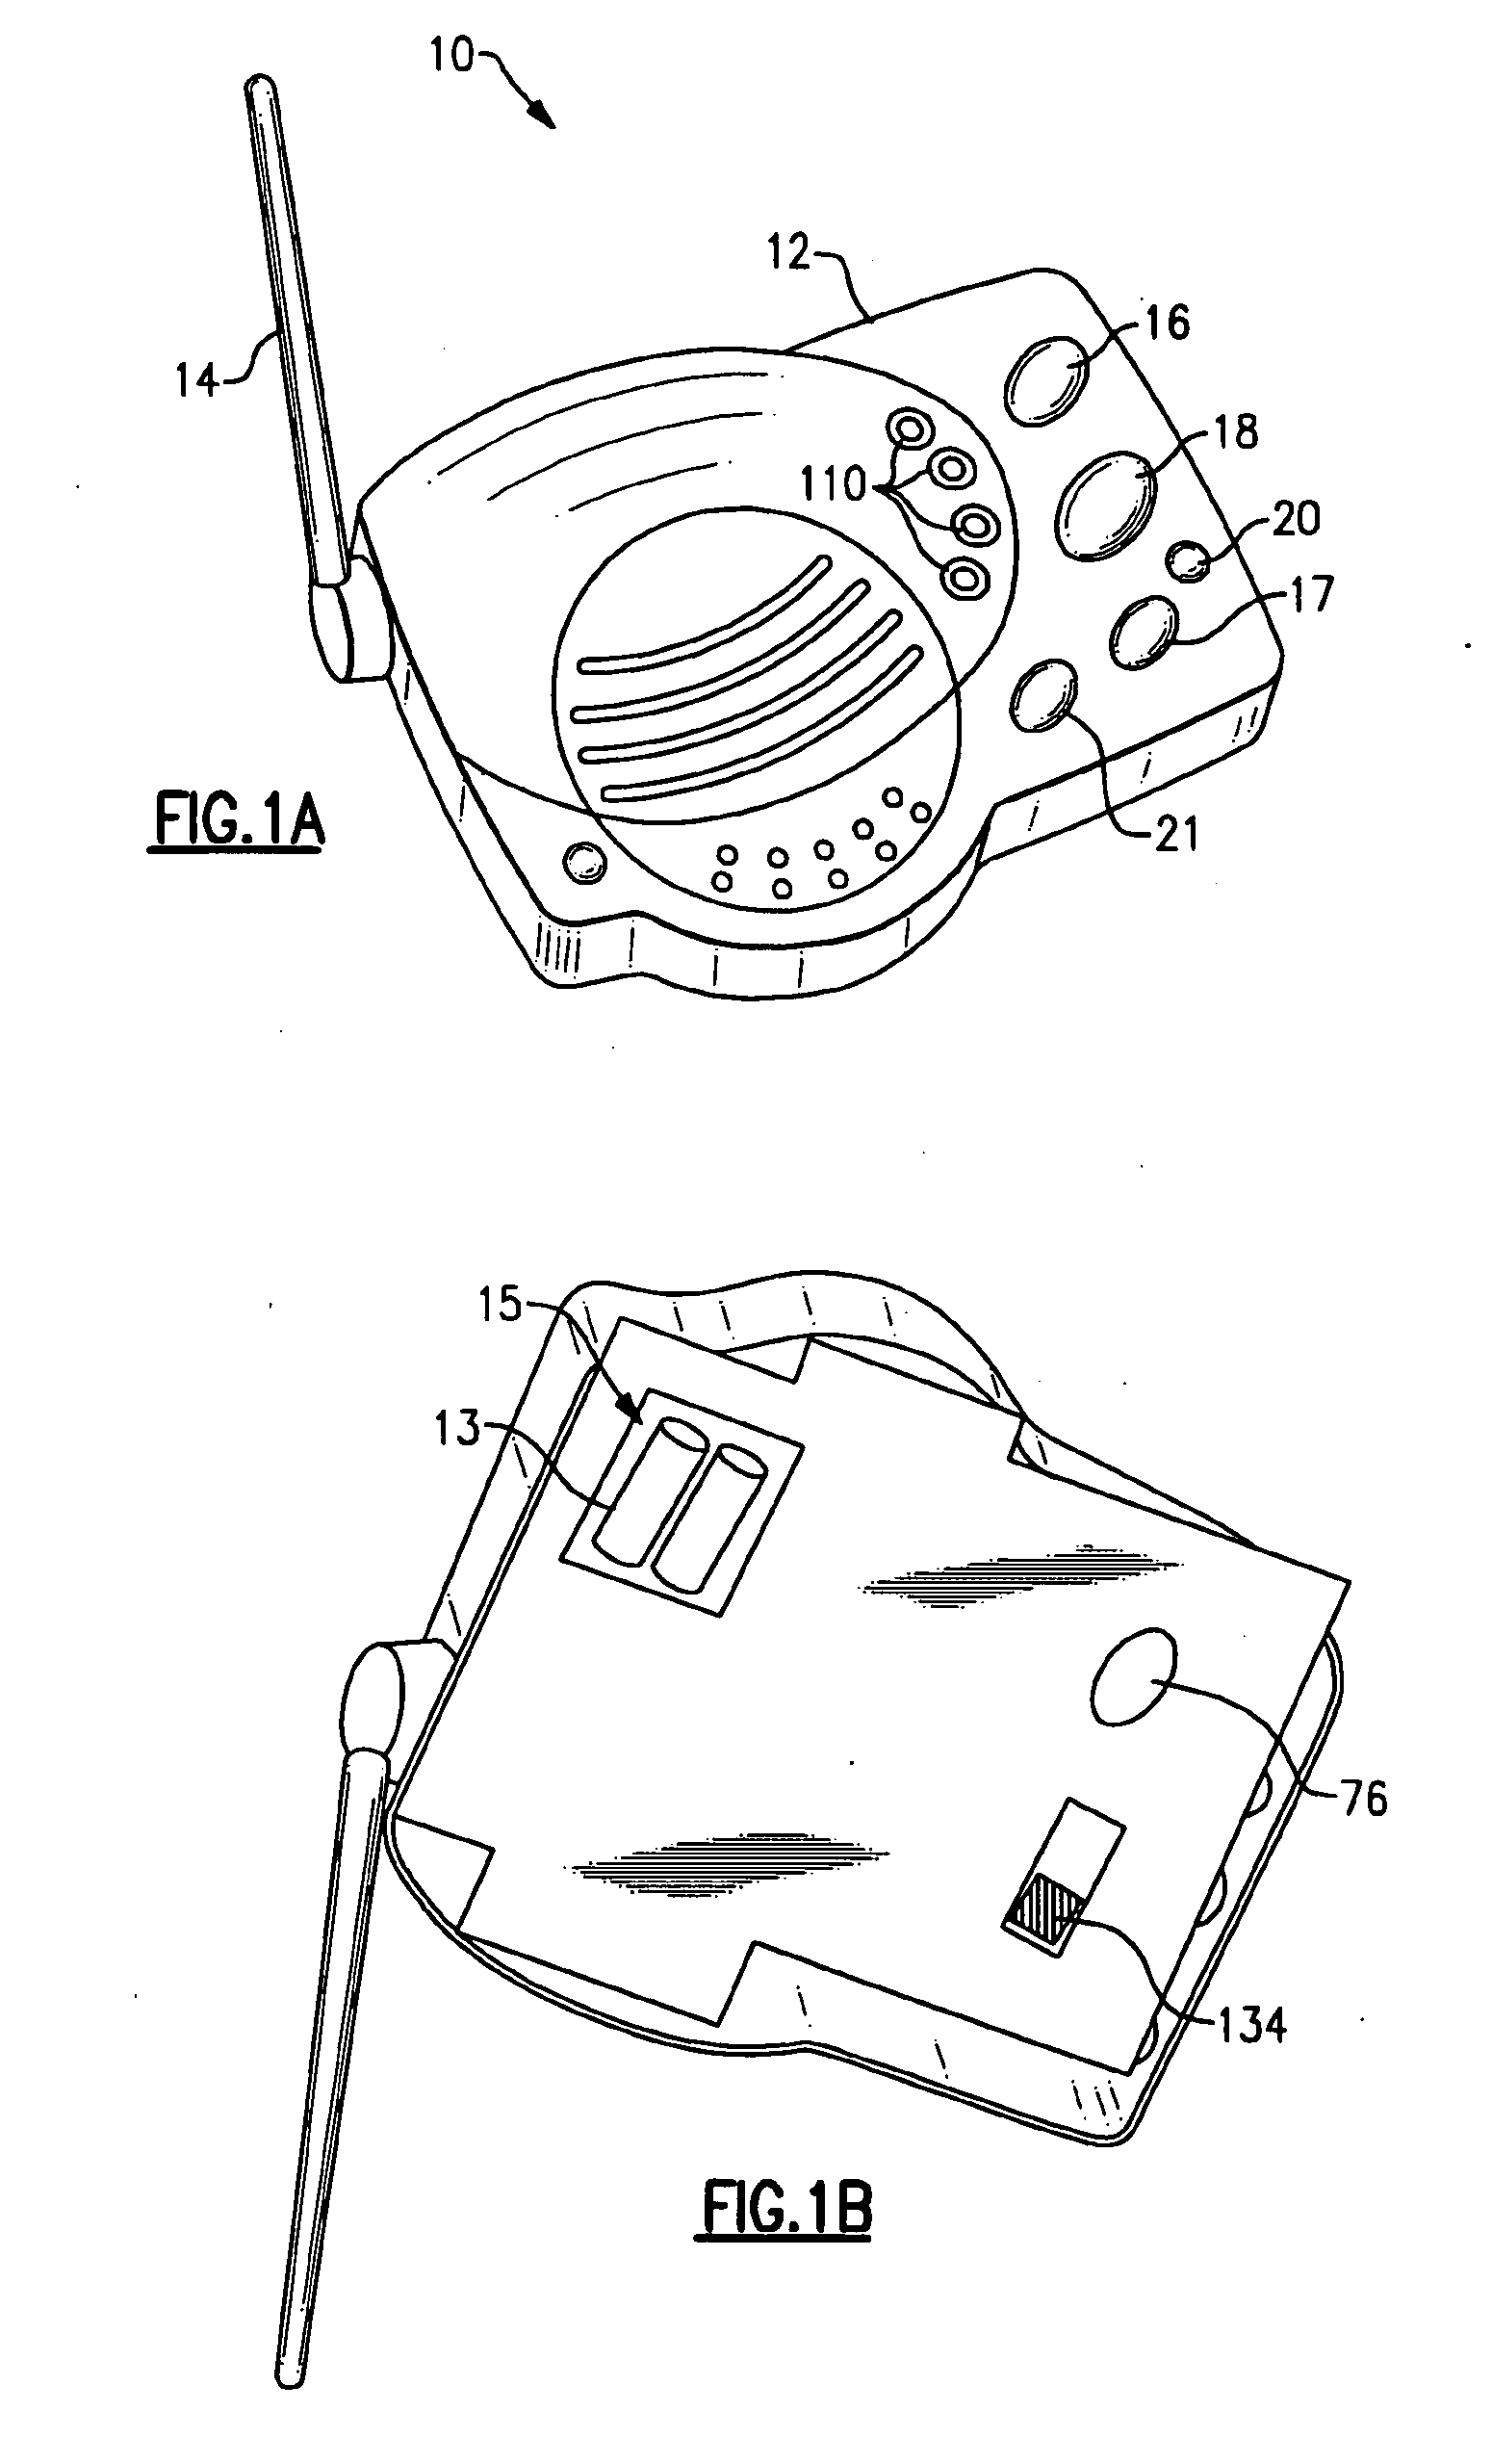 Wirefree intercom having low power system and process